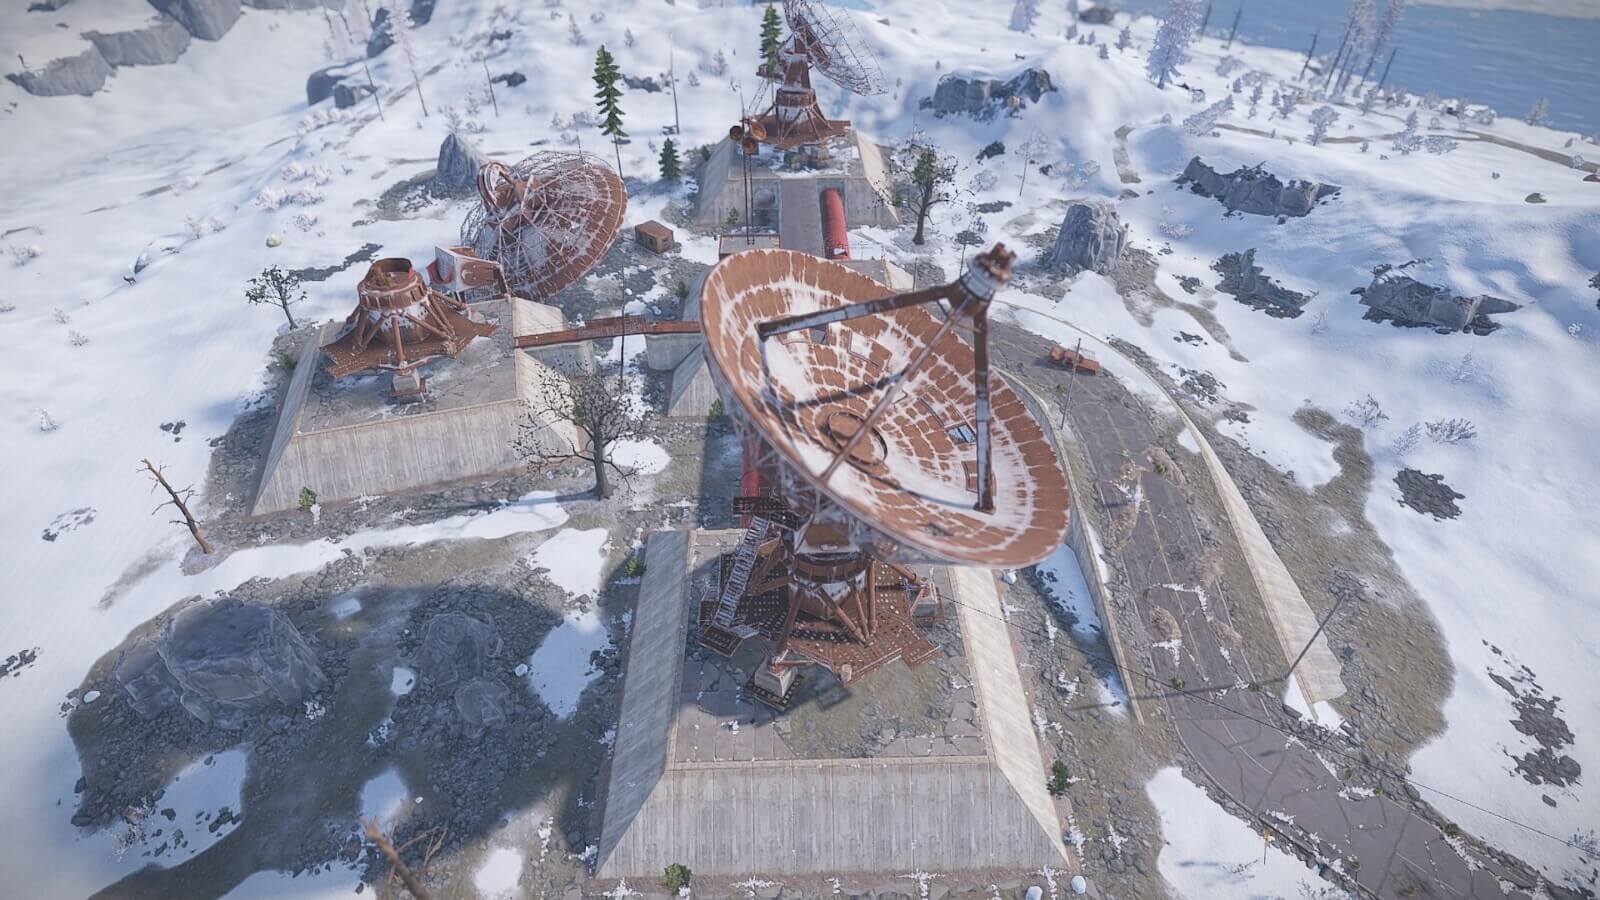 Side screenshot of the broad view of the satellite dish monument in Rust.